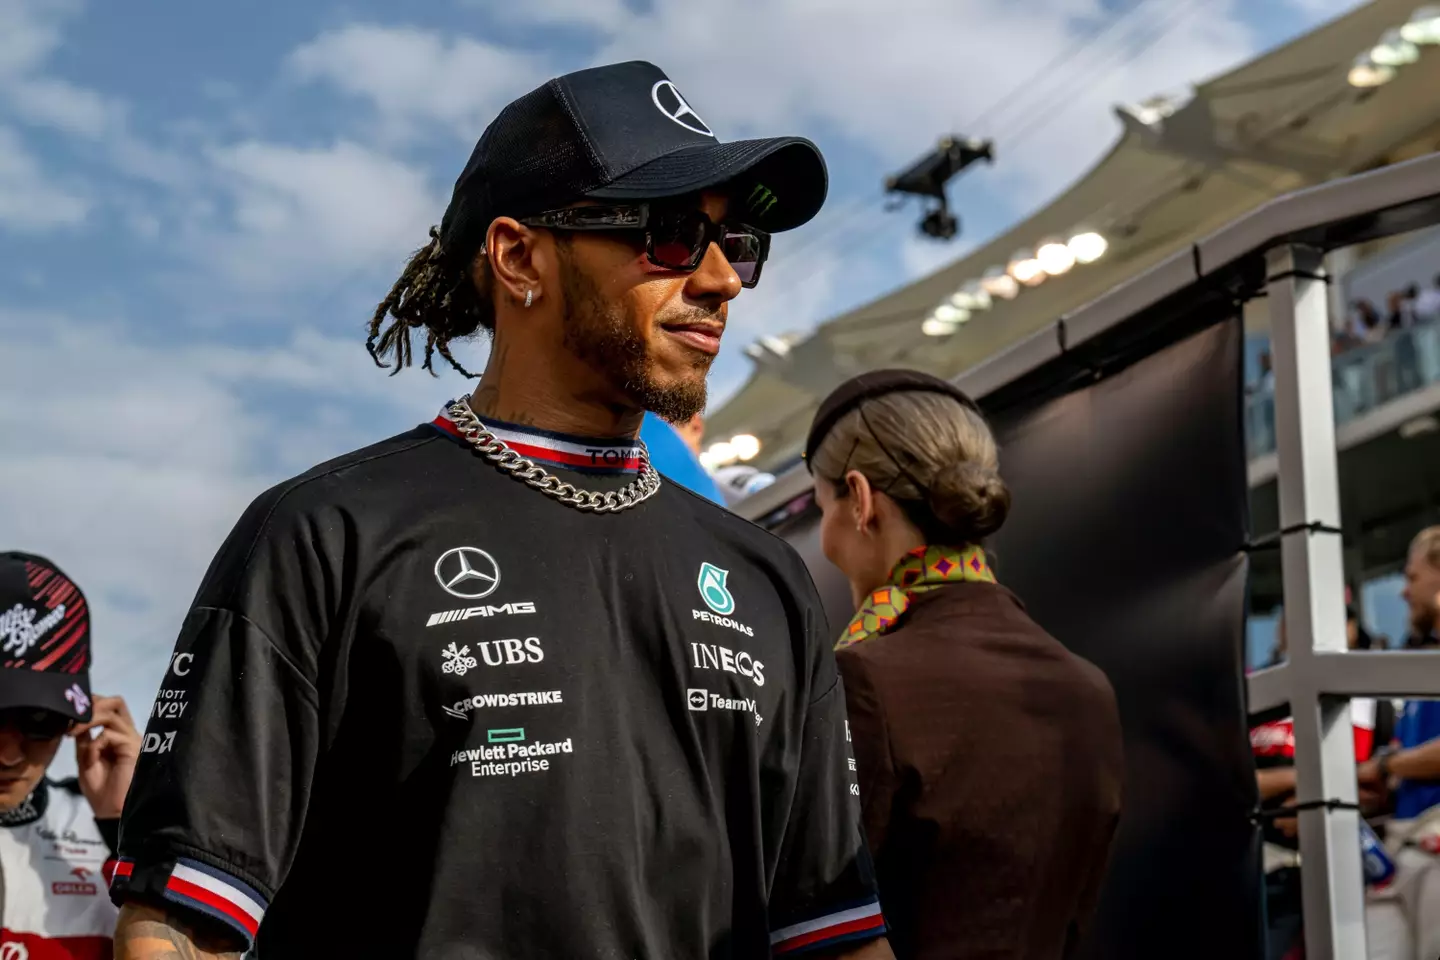 Sir Lewis Hamilton can often be seeing whizzing around on a scooter before a race. Image: Alamy